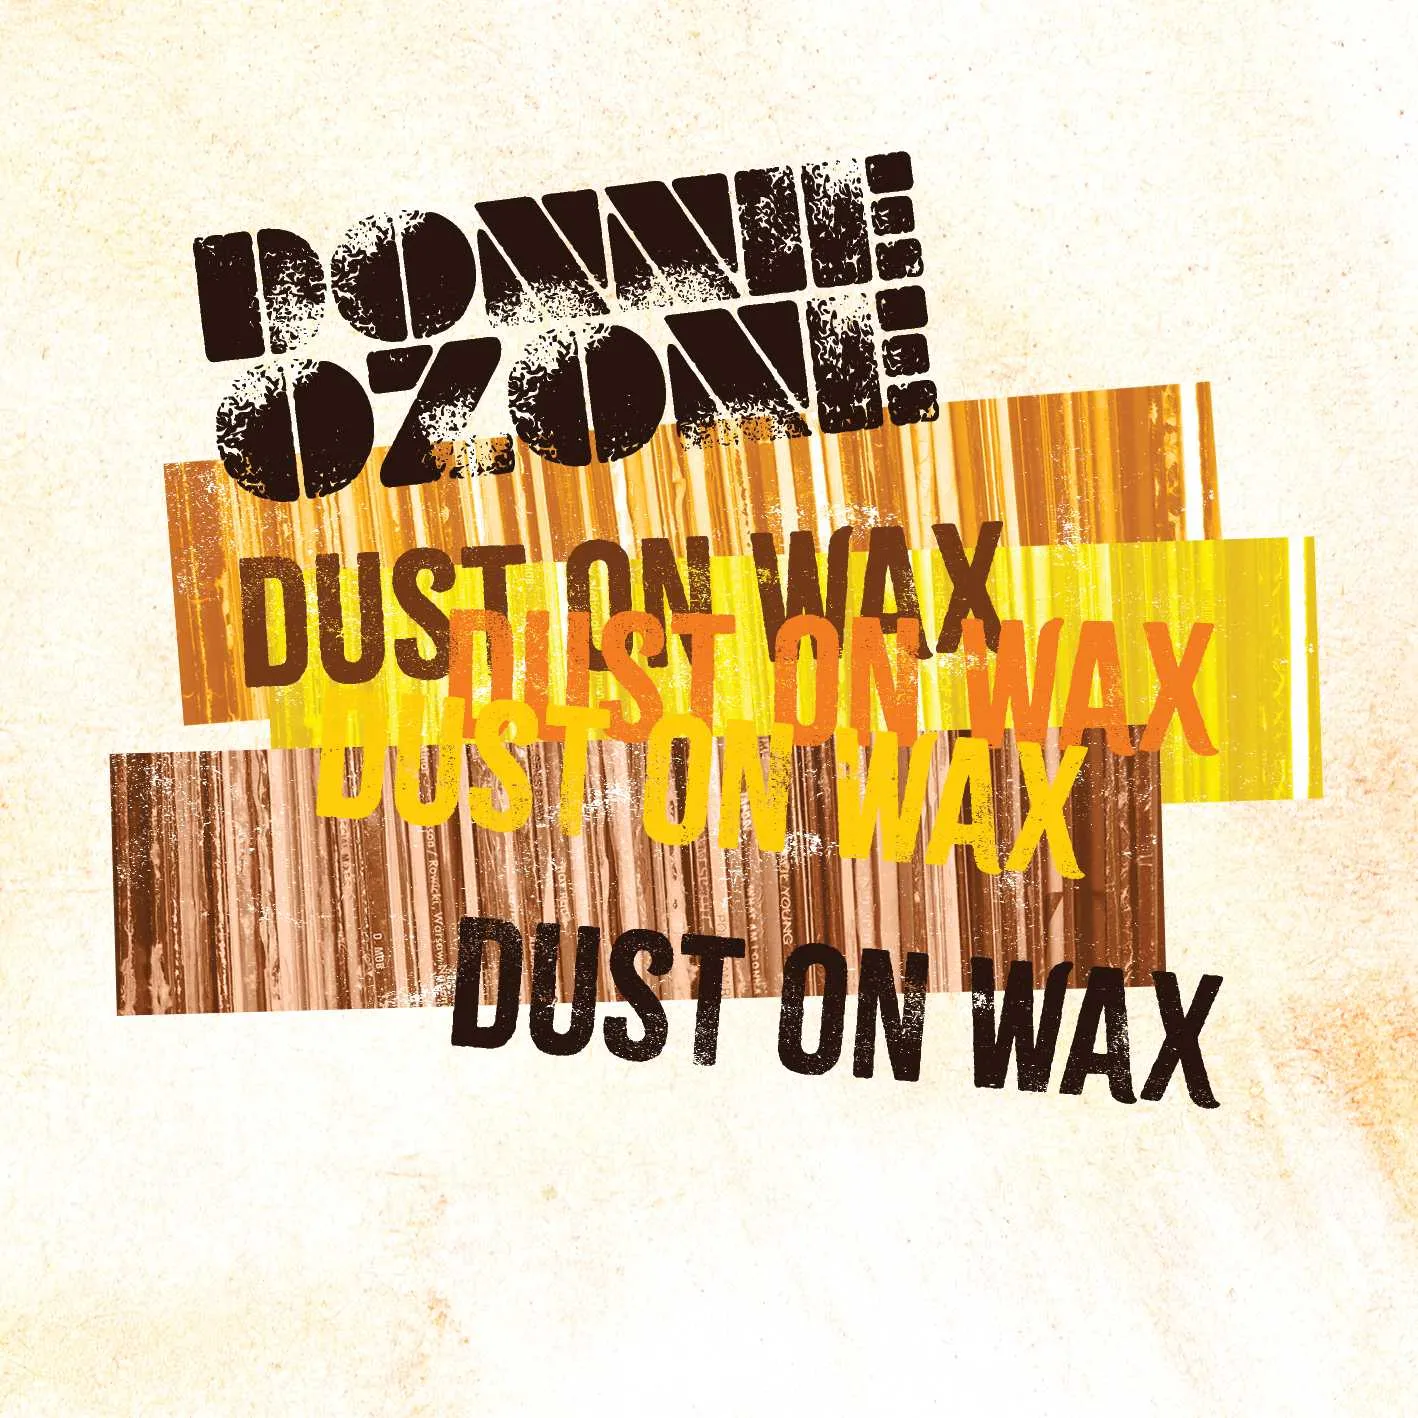 Album cover for “Dust On Wax” by Donnie Ozone